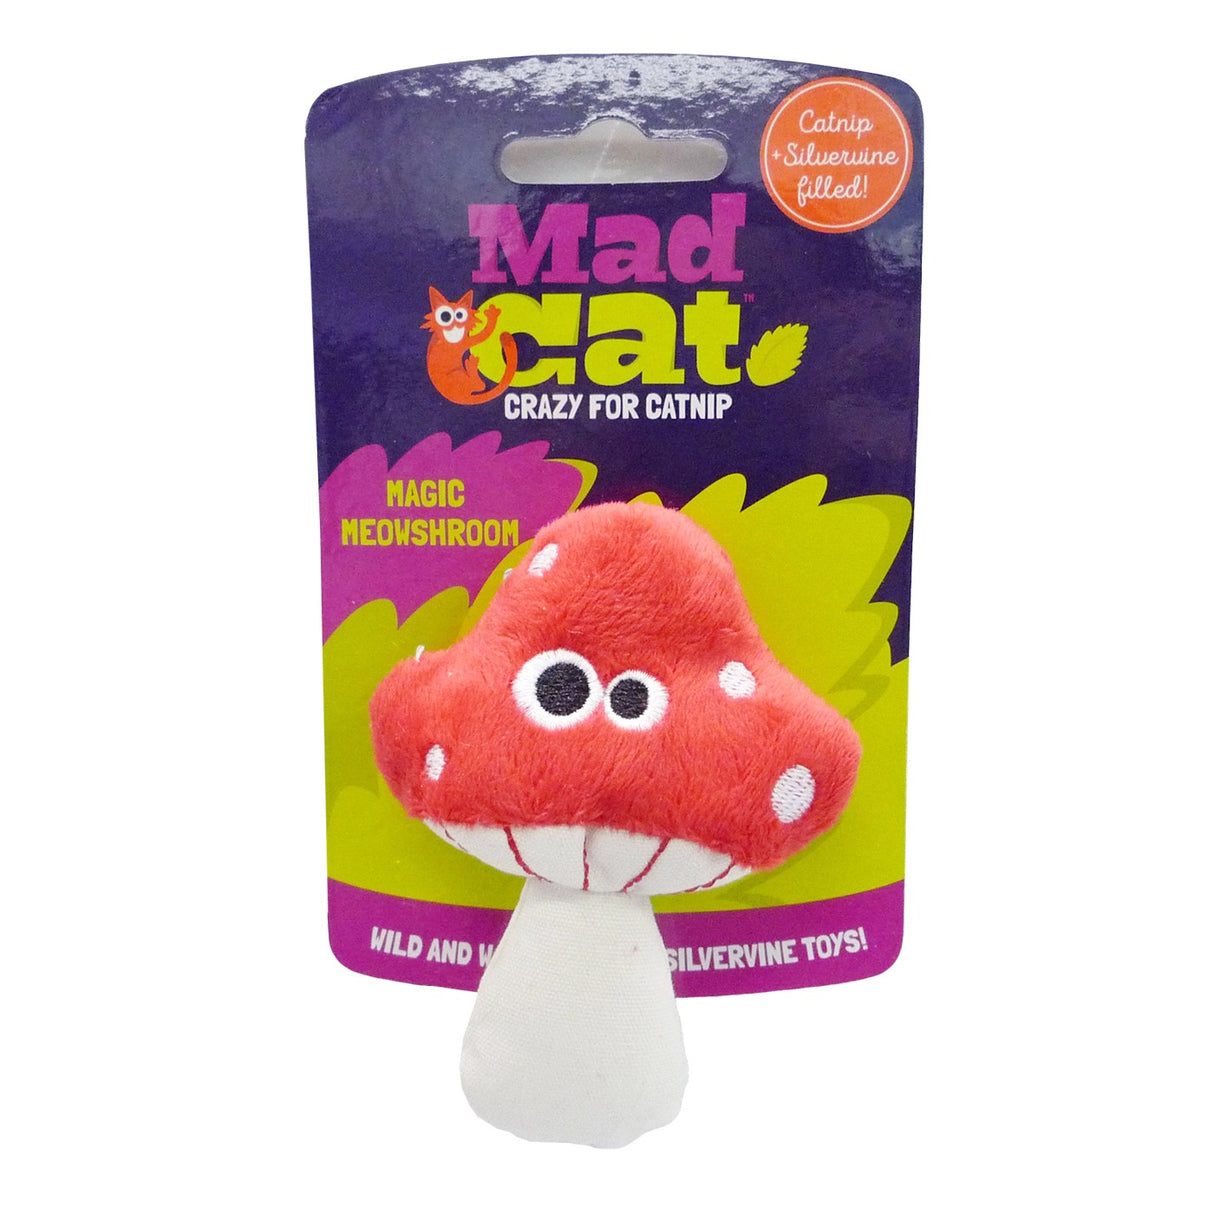 Mad Cat Magic Meowshroom jouet pour chat